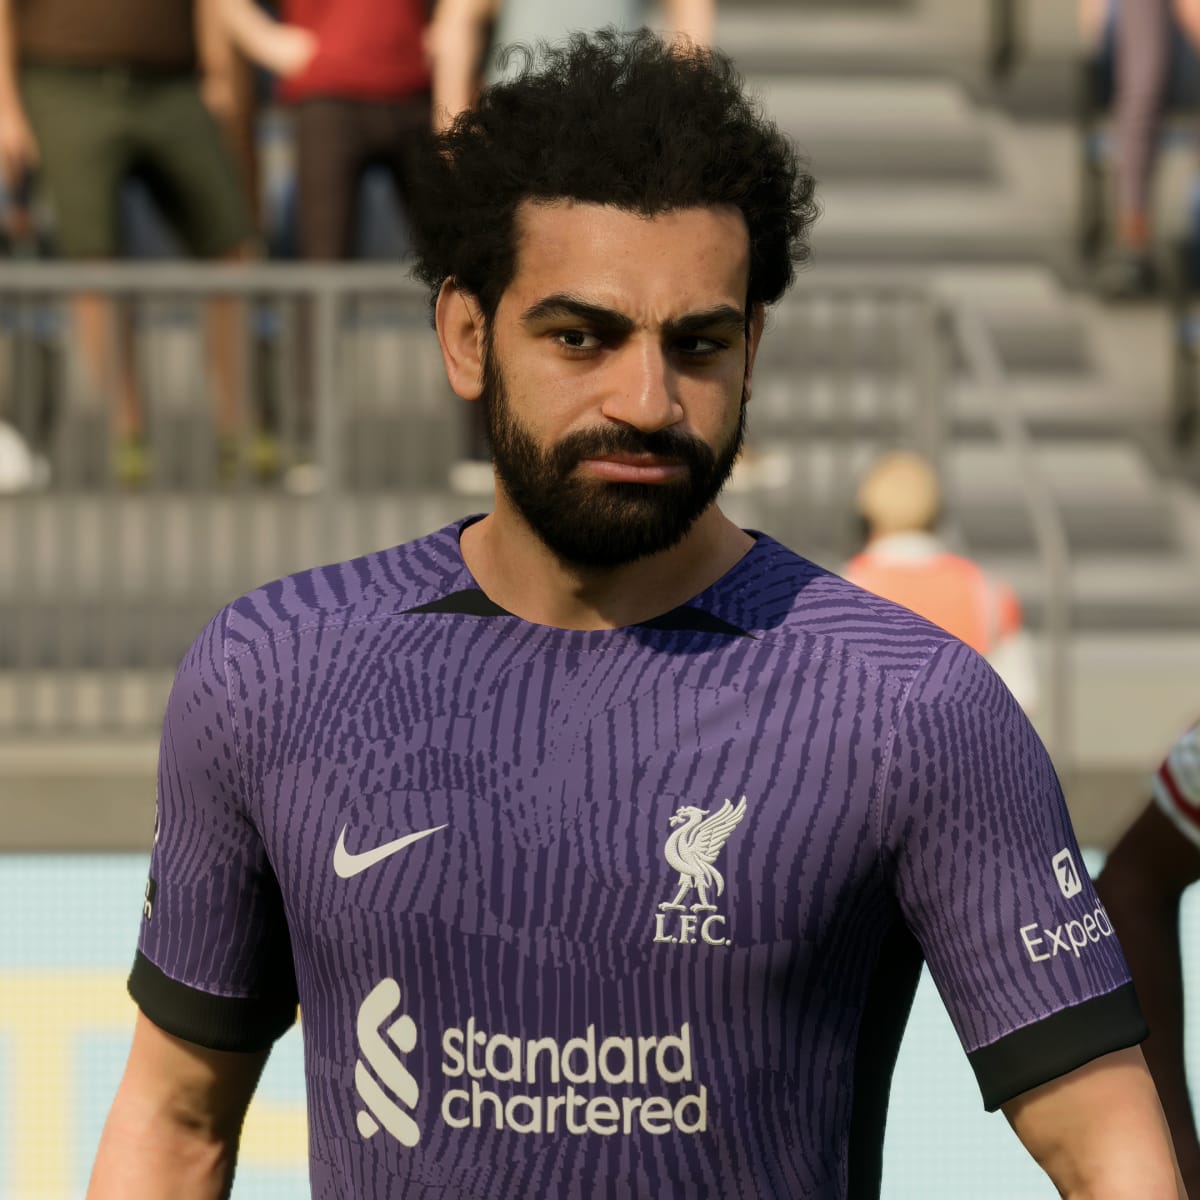 EA FC 24 Title Update 3: patch notes for version 1.0.4 - Video Games on  Sports Illustrated